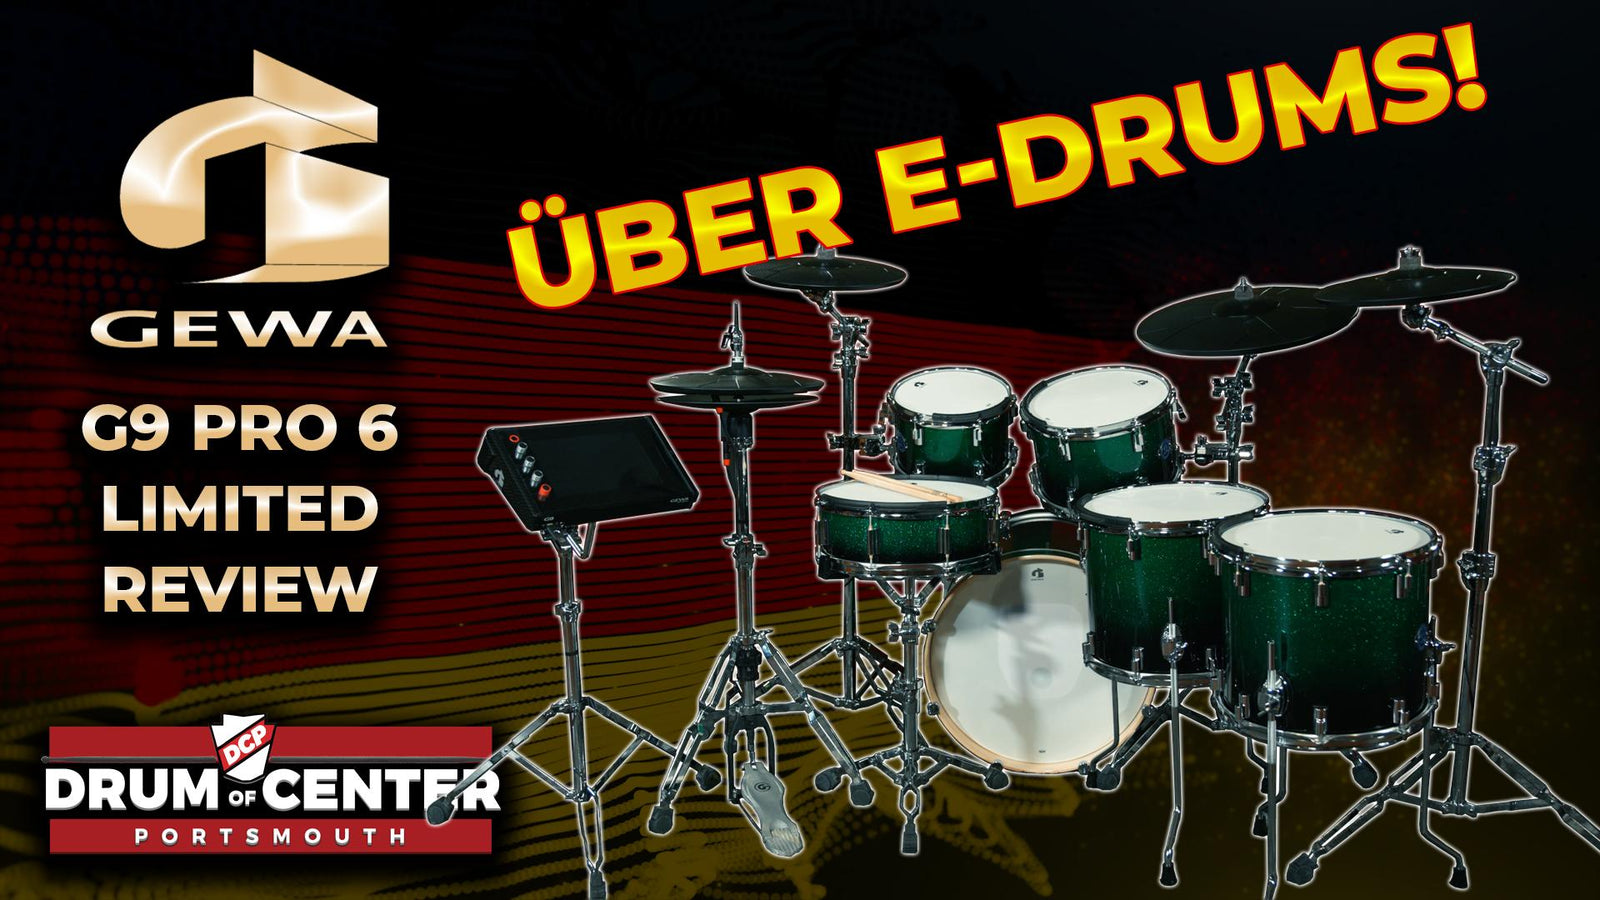 Gewa G9 Series - A New Option in High-End E-Drums